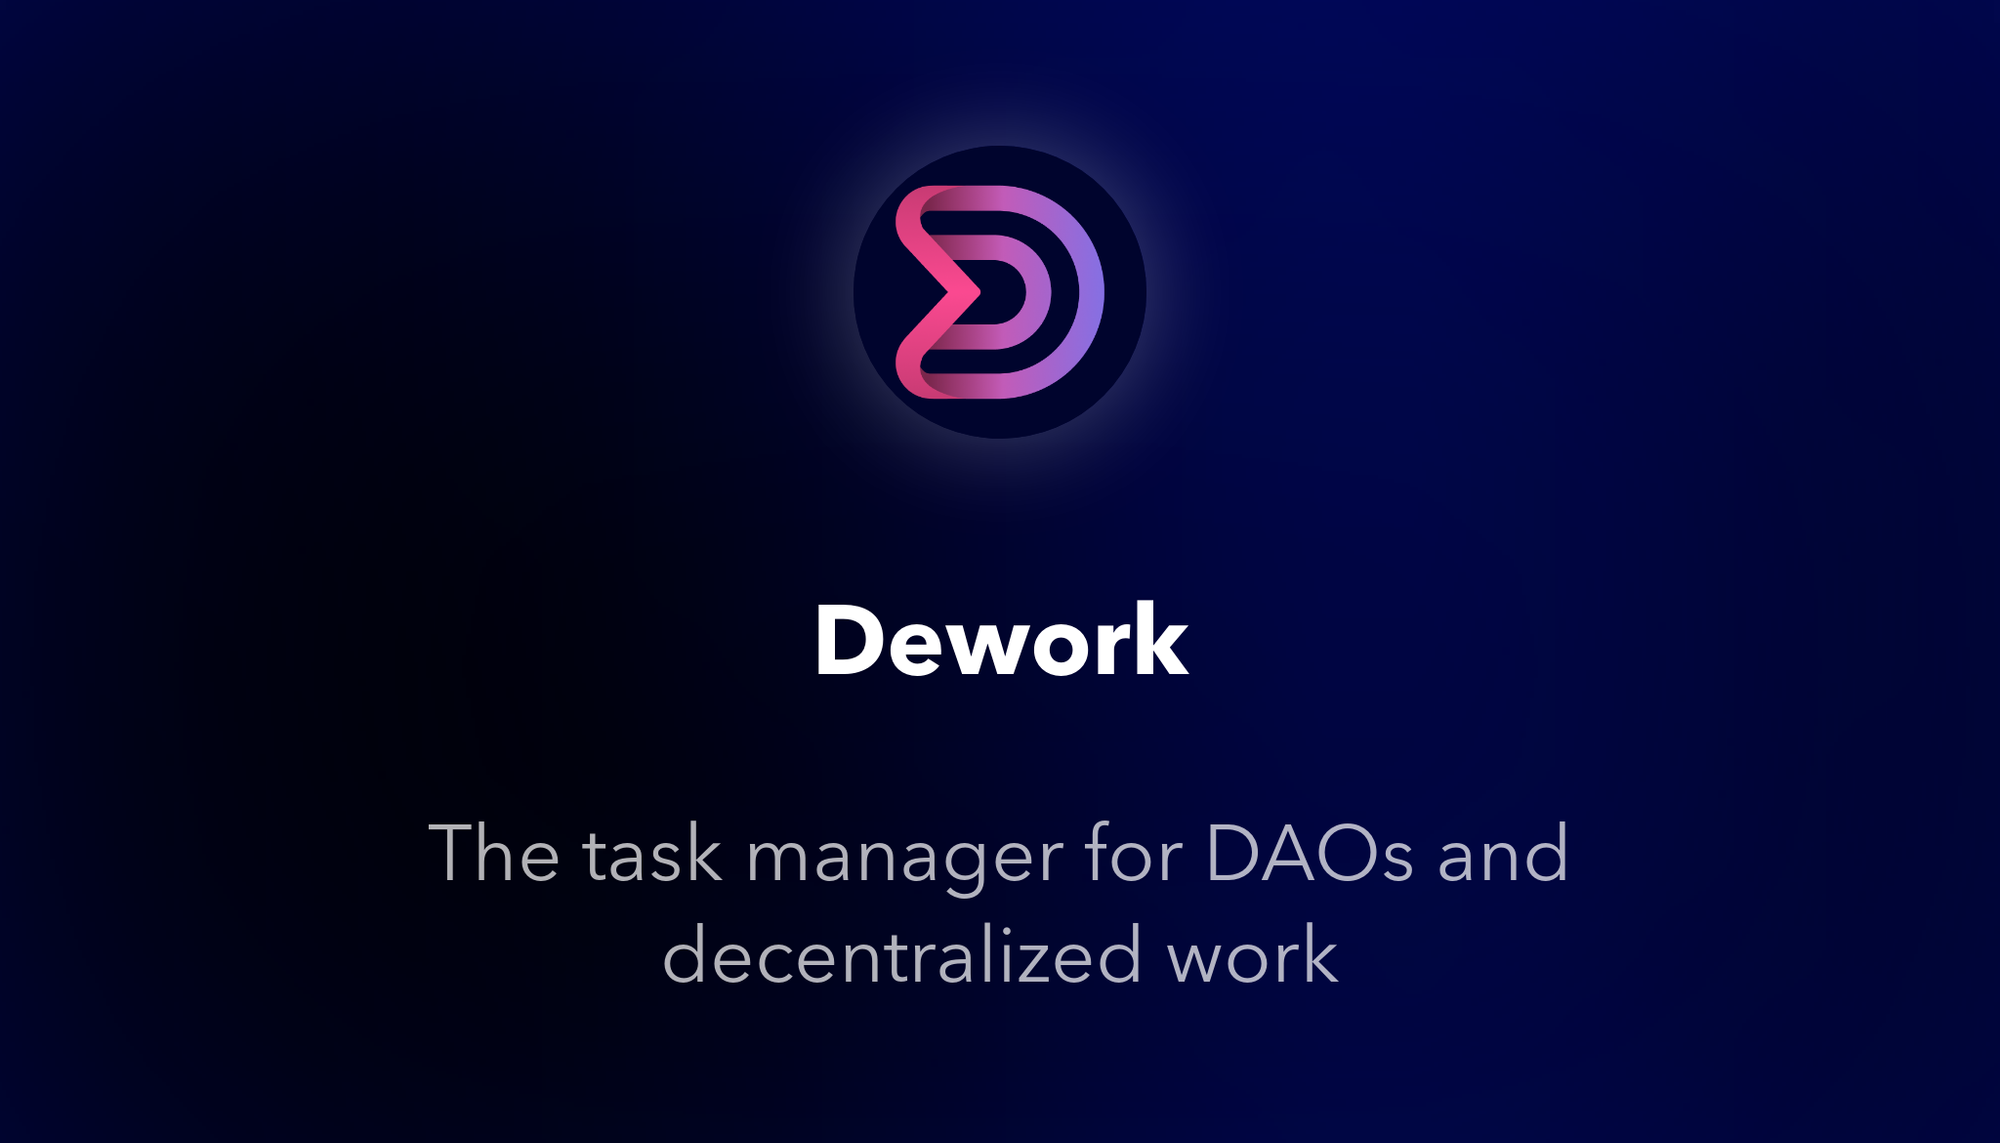 Dework - The task manager for DAOs and decentralized work